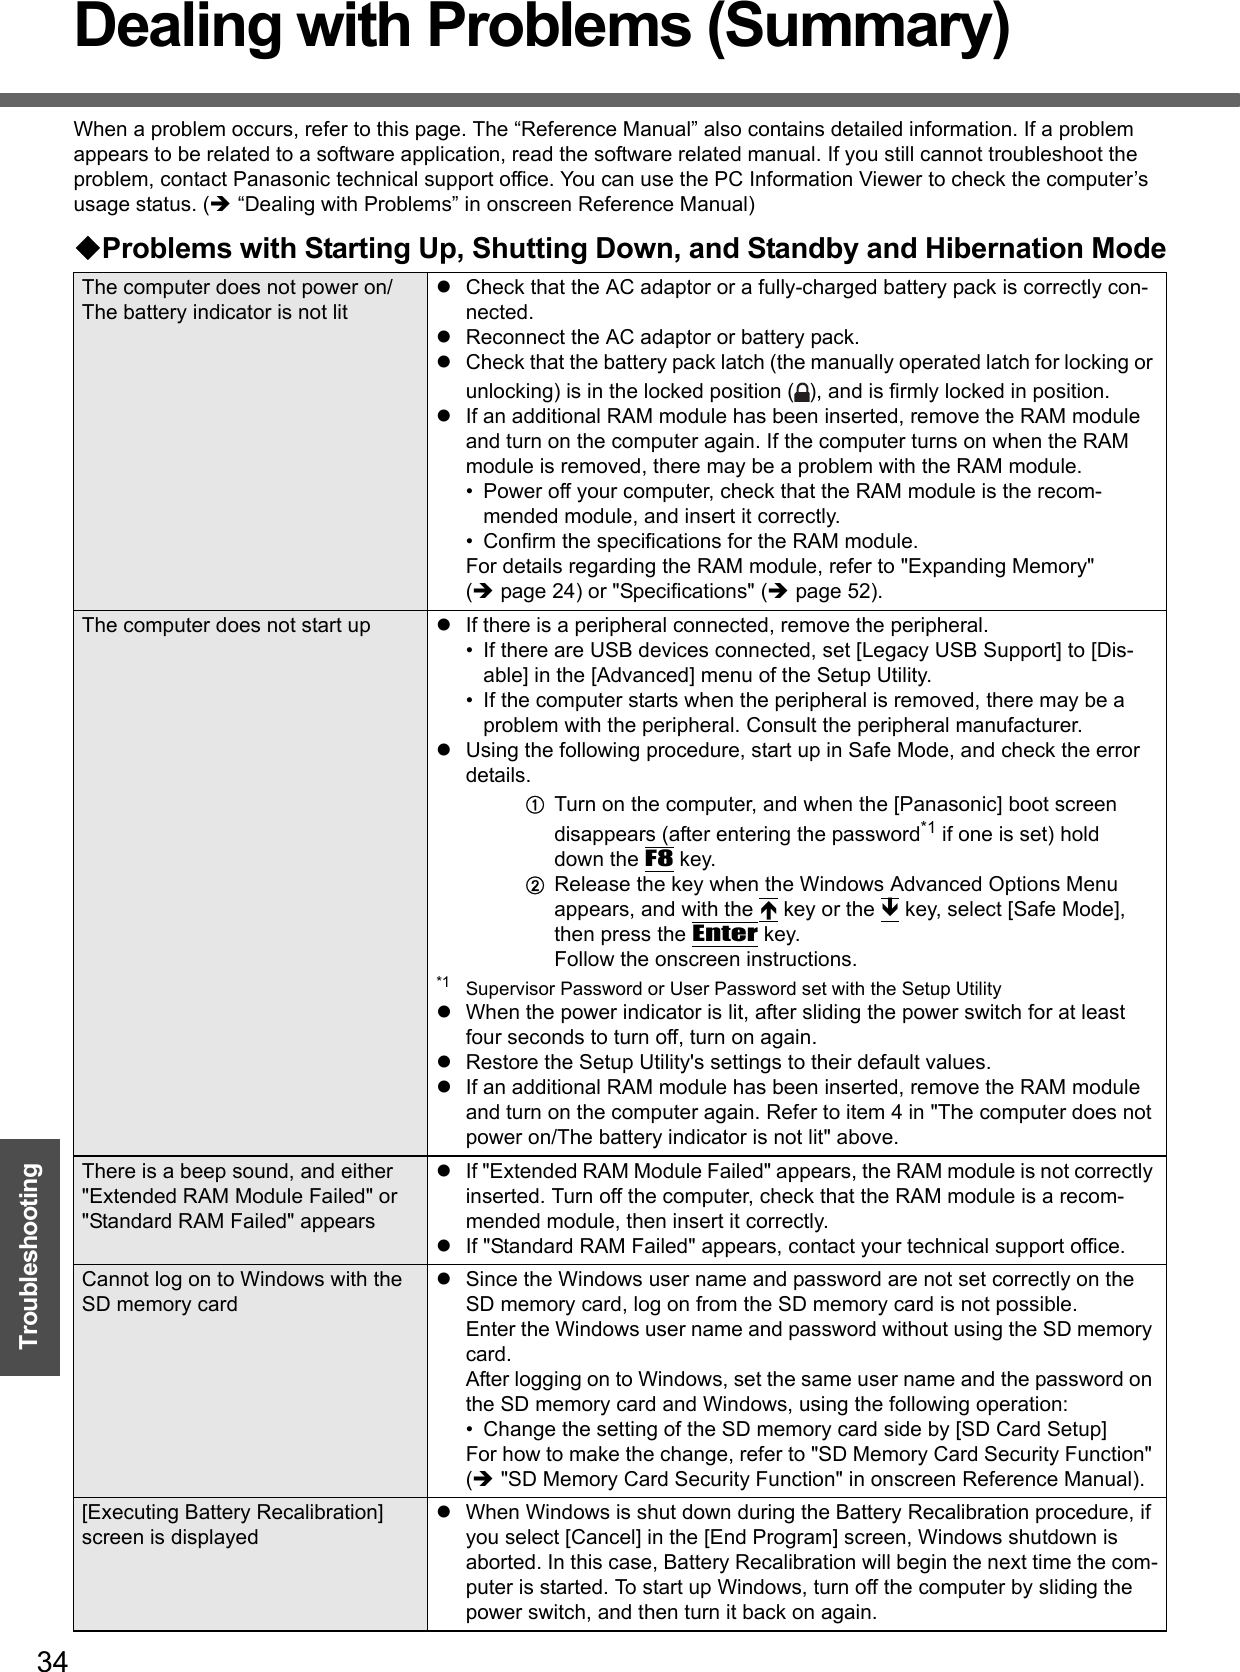 34TroubleshootingDealing with Problems (Summary)When a problem occurs, refer to this page. The “Reference Manual” also contains detailed information. If a problem appears to be related to a software application, read the software related manual. If you still cannot troubleshoot the problem, contact Panasonic technical support office. You can use the PC Information Viewer to check the computer’s usage status. (Î “Dealing with Problems” in onscreen Reference Manual)Problems with Starting Up, Shutting Down, and Standby and Hibernation ModeThe computer does not power on/The battery indicator is not litzCheck that the AC adaptor or a fully-charged battery pack is correctly con-nected.zReconnect the AC adaptor or battery pack.zCheck that the battery pack latch (the manually operated latch for locking or unlocking) is in the locked position ( ), and is firmly locked in position.zIf an additional RAM module has been inserted, remove the RAM module and turn on the computer again. If the computer turns on when the RAM module is removed, there may be a problem with the RAM module. • Power off your computer, check that the RAM module is the recom-mended module, and insert it correctly. • Confirm the specifications for the RAM module.For details regarding the RAM module, refer to &quot;Expanding Memory&quot; (Îpage 24) or &quot;Specifications&quot; (Îpage 52). The computer does not start up zIf there is a peripheral connected, remove the peripheral.• If there are USB devices connected, set [Legacy USB Support] to [Dis-able] in the [Advanced] menu of the Setup Utility. • If the computer starts when the peripheral is removed, there may be a problem with the peripheral. Consult the peripheral manufacturer.zUsing the following procedure, start up in Safe Mode, and check the error details.ATurn on the computer, and when the [Panasonic] boot screen disappears (after entering the password*1 if one is set) hold down the F8 key.BRelease the key when the Windows Advanced Options Menu appears, and with the Ï key or the Ð key, select [Safe Mode], then press the Enter key.Follow the onscreen instructions.*1 Supervisor Password or User Password set with the Setup UtilityzWhen the power indicator is lit, after sliding the power switch for at least four seconds to turn off, turn on again.zRestore the Setup Utility&apos;s settings to their default values.zIf an additional RAM module has been inserted, remove the RAM module and turn on the computer again. Refer to item 4 in &quot;The computer does not power on/The battery indicator is not lit&quot; above.There is a beep sound, and either &quot;Extended RAM Module Failed&quot; or &quot;Standard RAM Failed&quot; appearszIf &quot;Extended RAM Module Failed&quot; appears, the RAM module is not correctly inserted. Turn off the computer, check that the RAM module is a recom-mended module, then insert it correctly.zIf &quot;Standard RAM Failed&quot; appears, contact your technical support office.Cannot log on to Windows with the SD memory cardzSince the Windows user name and password are not set correctly on the SD memory card, log on from the SD memory card is not possible.Enter the Windows user name and password without using the SD memory card.After logging on to Windows, set the same user name and the password on the SD memory card and Windows, using the following operation:• Change the setting of the SD memory card side by [SD Card Setup]For how to make the change, refer to &quot;SD Memory Card Security Function&quot; (Î &quot;SD Memory Card Security Function&quot; in onscreen Reference Manual).[Executing Battery Recalibration] screen is displayedzWhen Windows is shut down during the Battery Recalibration procedure, if you select [Cancel] in the [End Program] screen, Windows shutdown is aborted. In this case, Battery Recalibration will begin the next time the com-puter is started. To start up Windows, turn off the computer by sliding the power switch, and then turn it back on again.